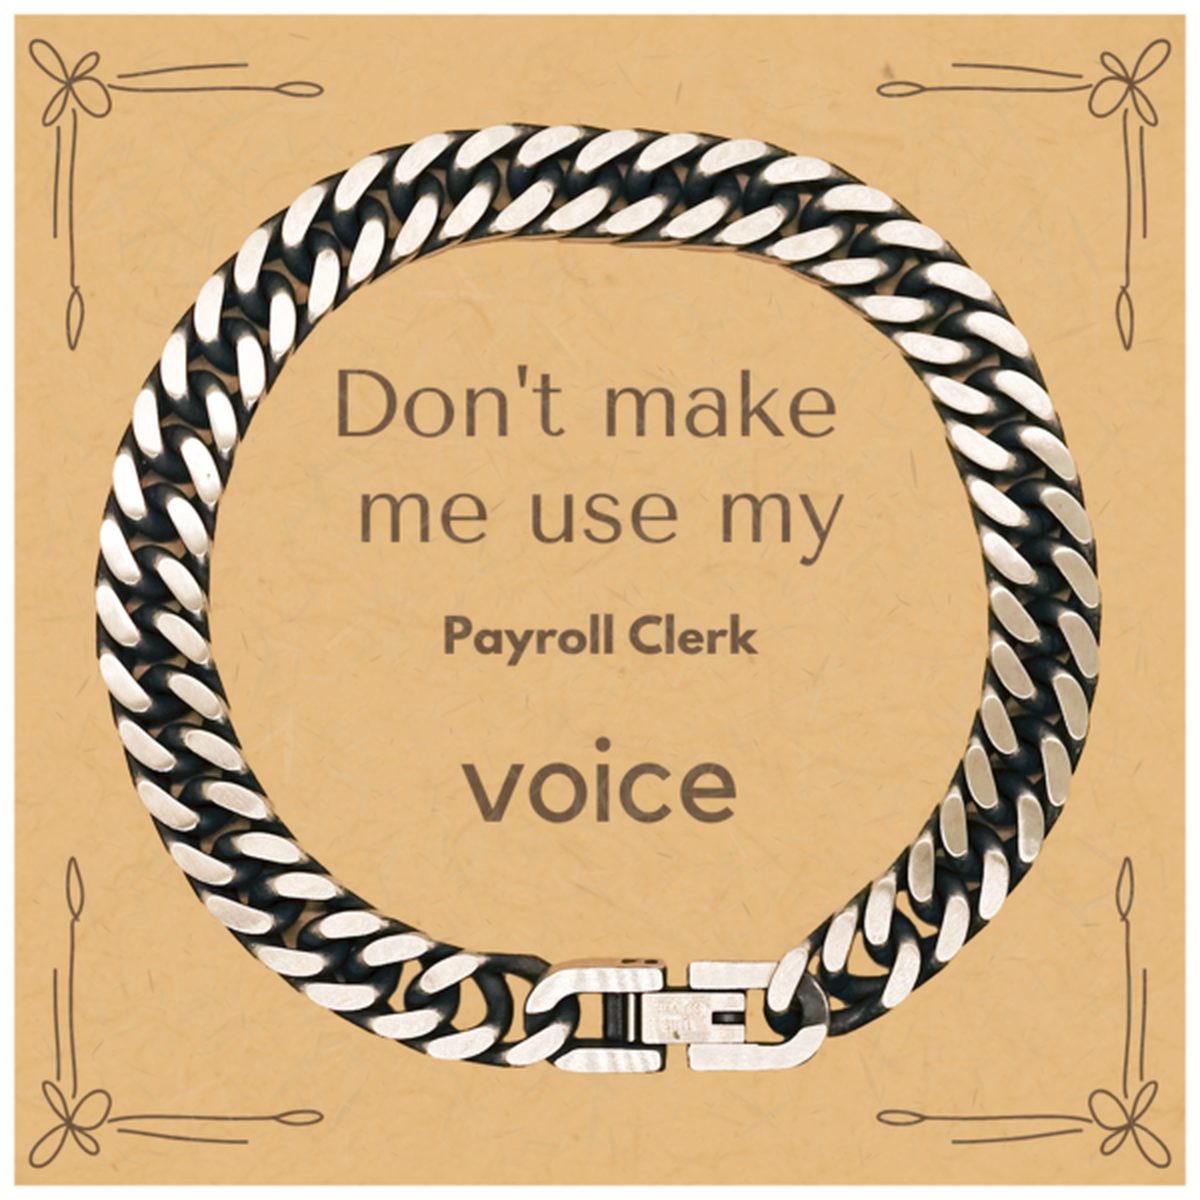 Don't make me use my Payroll Clerk voice, Sarcasm Payroll Clerk Card Gifts, Christmas Payroll Clerk Cuban Link Chain Bracelet Birthday Unique Gifts For Payroll Clerk Coworkers, Men, Women, Colleague, Friends